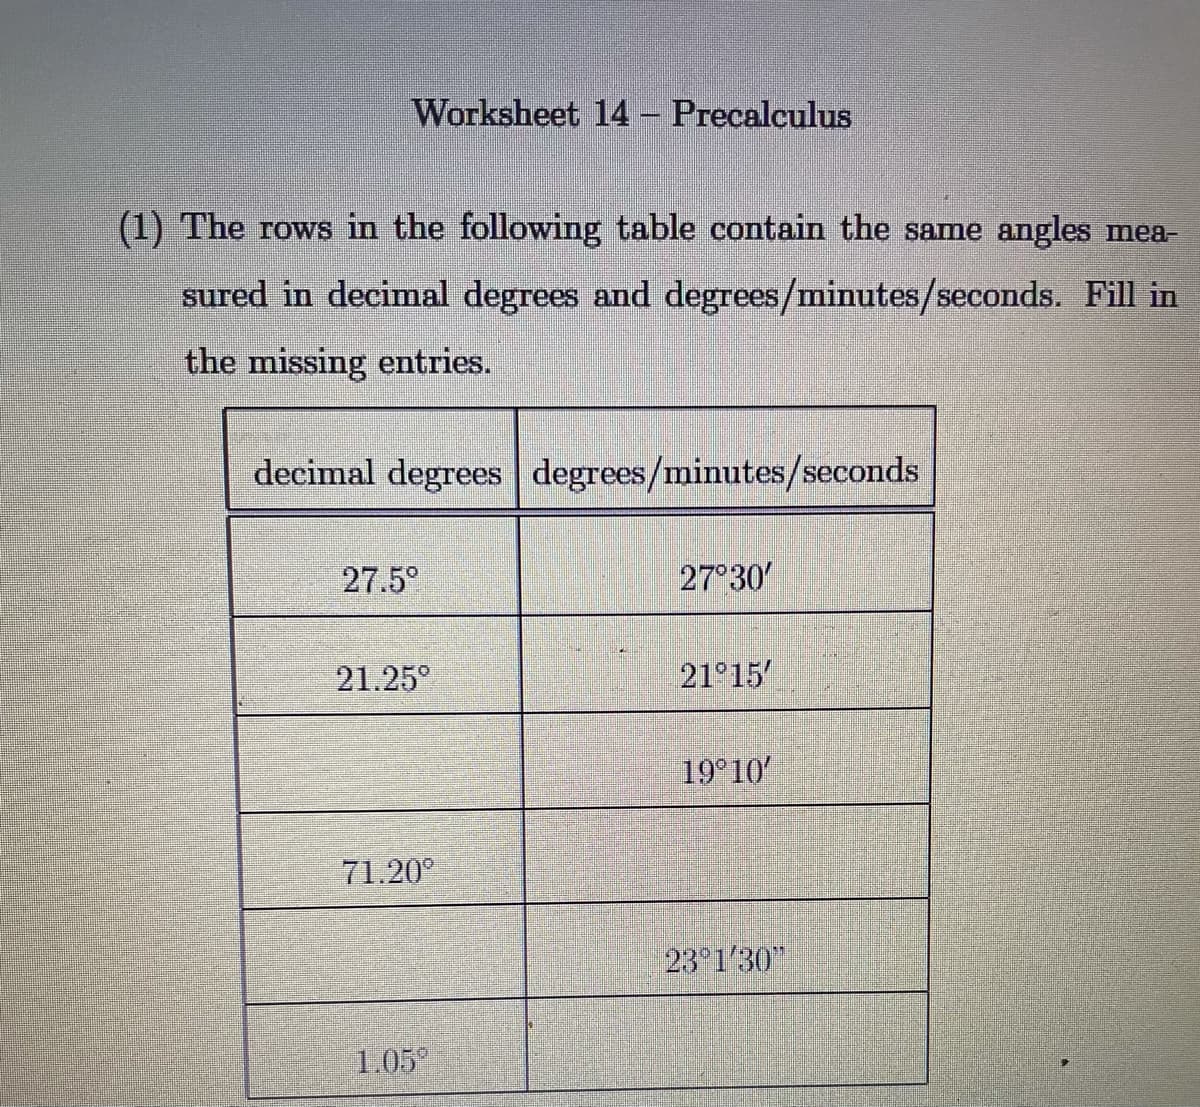 Worksheet 14 Precalculus
(1) The rows in the following table contain the same angles mea-
sured in decimal degrees and degrees/minutes/seconds. Fill in
the missing entries.
decimal degrees degrees/minutes/seconds
27.5°
27°30
21.25°
21°15
19° 10
71.20°
23 1'30"
1.05
